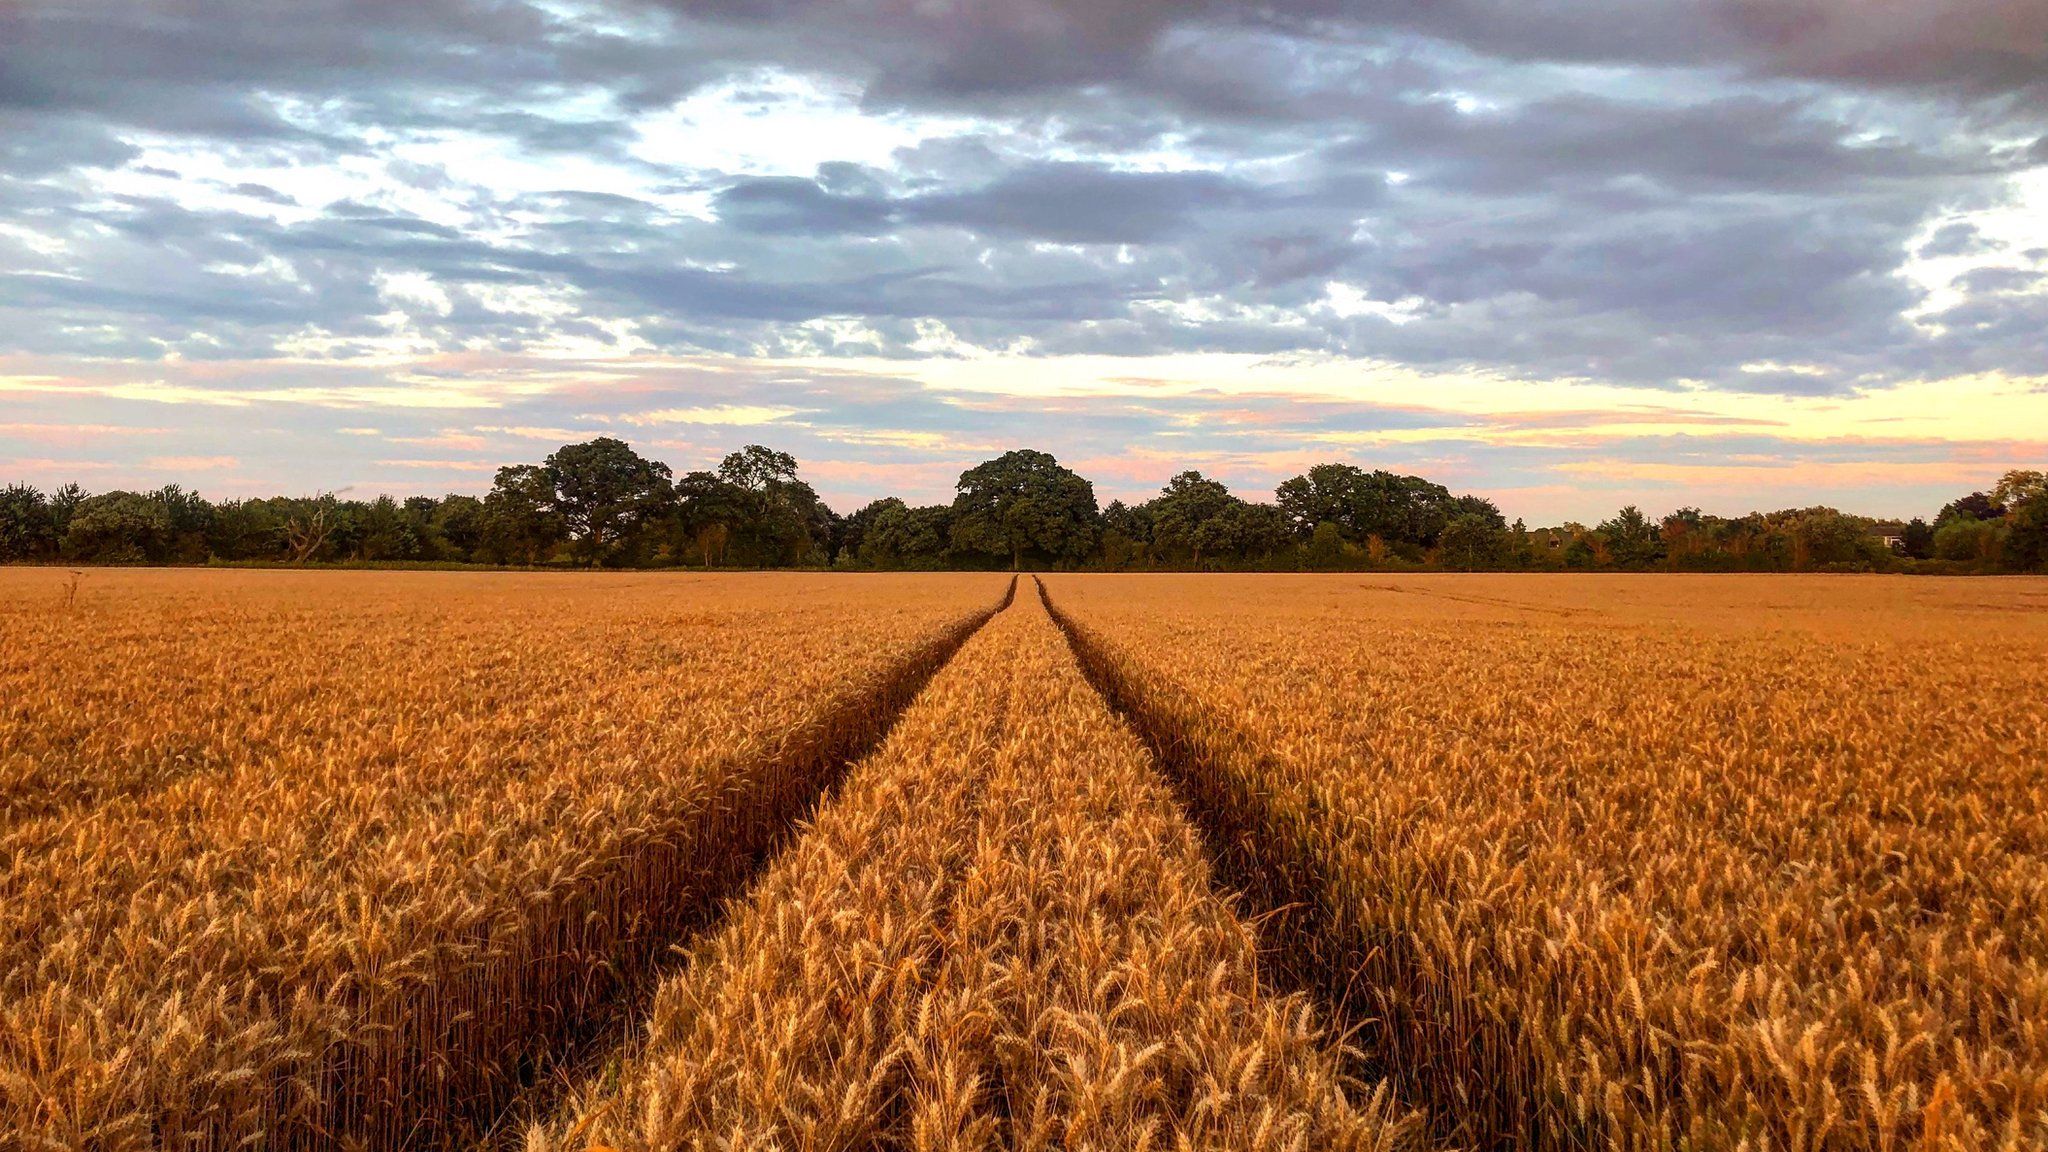 It's almost harvest time for Oxfordshire's fields